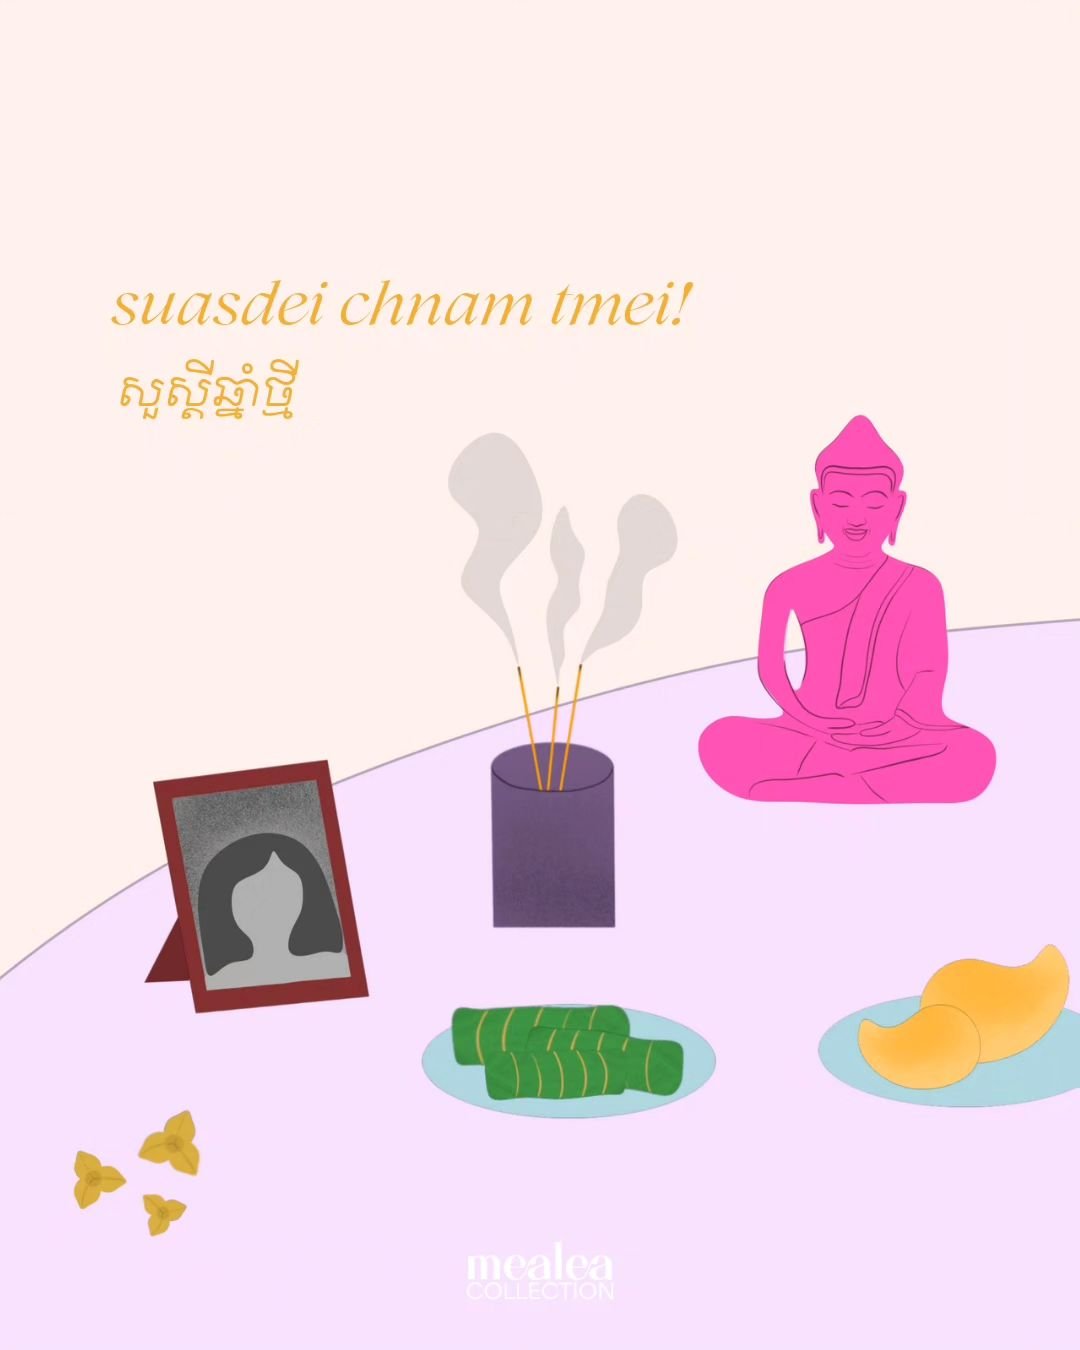 ✨Suasdei Chnam Tmei!✨Wishing you all a Happy Khmer New Year! 🫶🏼 May this year bring blessings upon blessings, healing, and lots of joy 💗

Illustration features pink Buddha statue inspired by the one I saw at Wat Khmer/Lodi, incense sticks, nom ans